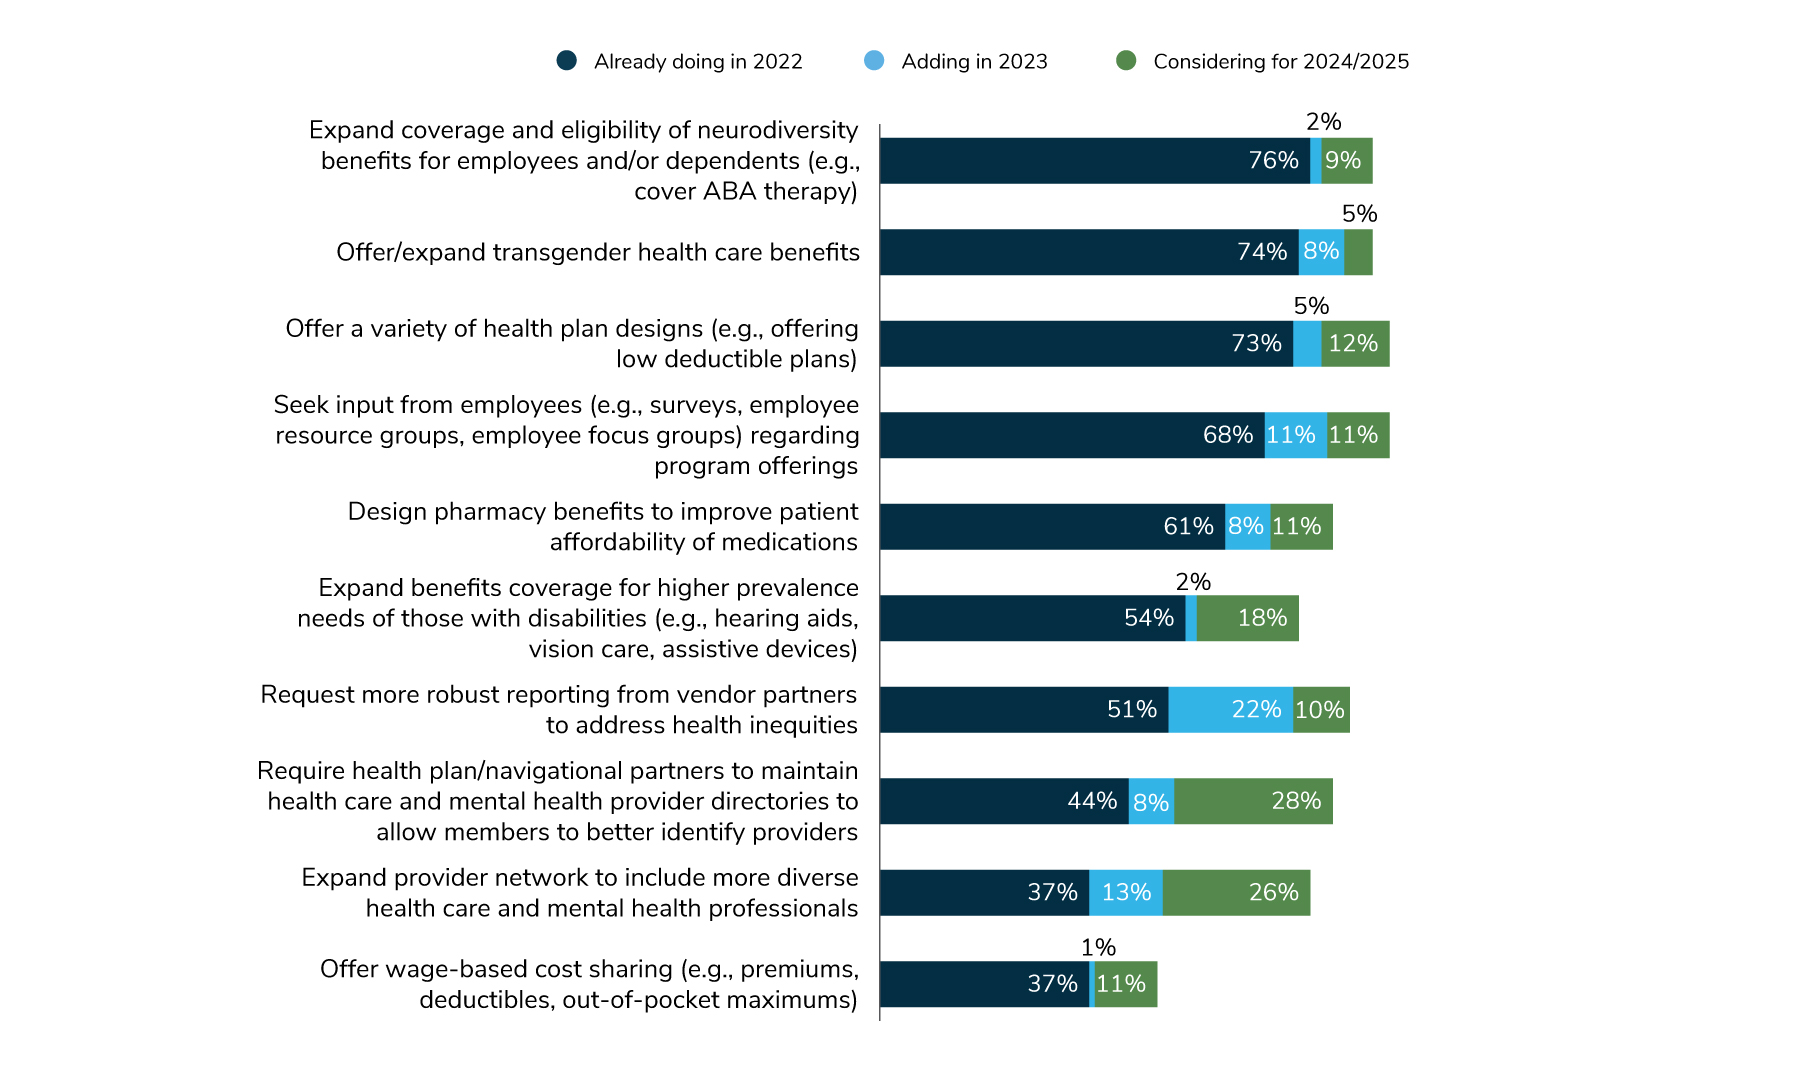 In 2023, 82% of employers will offer transgender health care benefits, 79% will expand coverage and eligibility of neurodiversity benefits for employees and 79% will seek input from employees regarding program offerings.